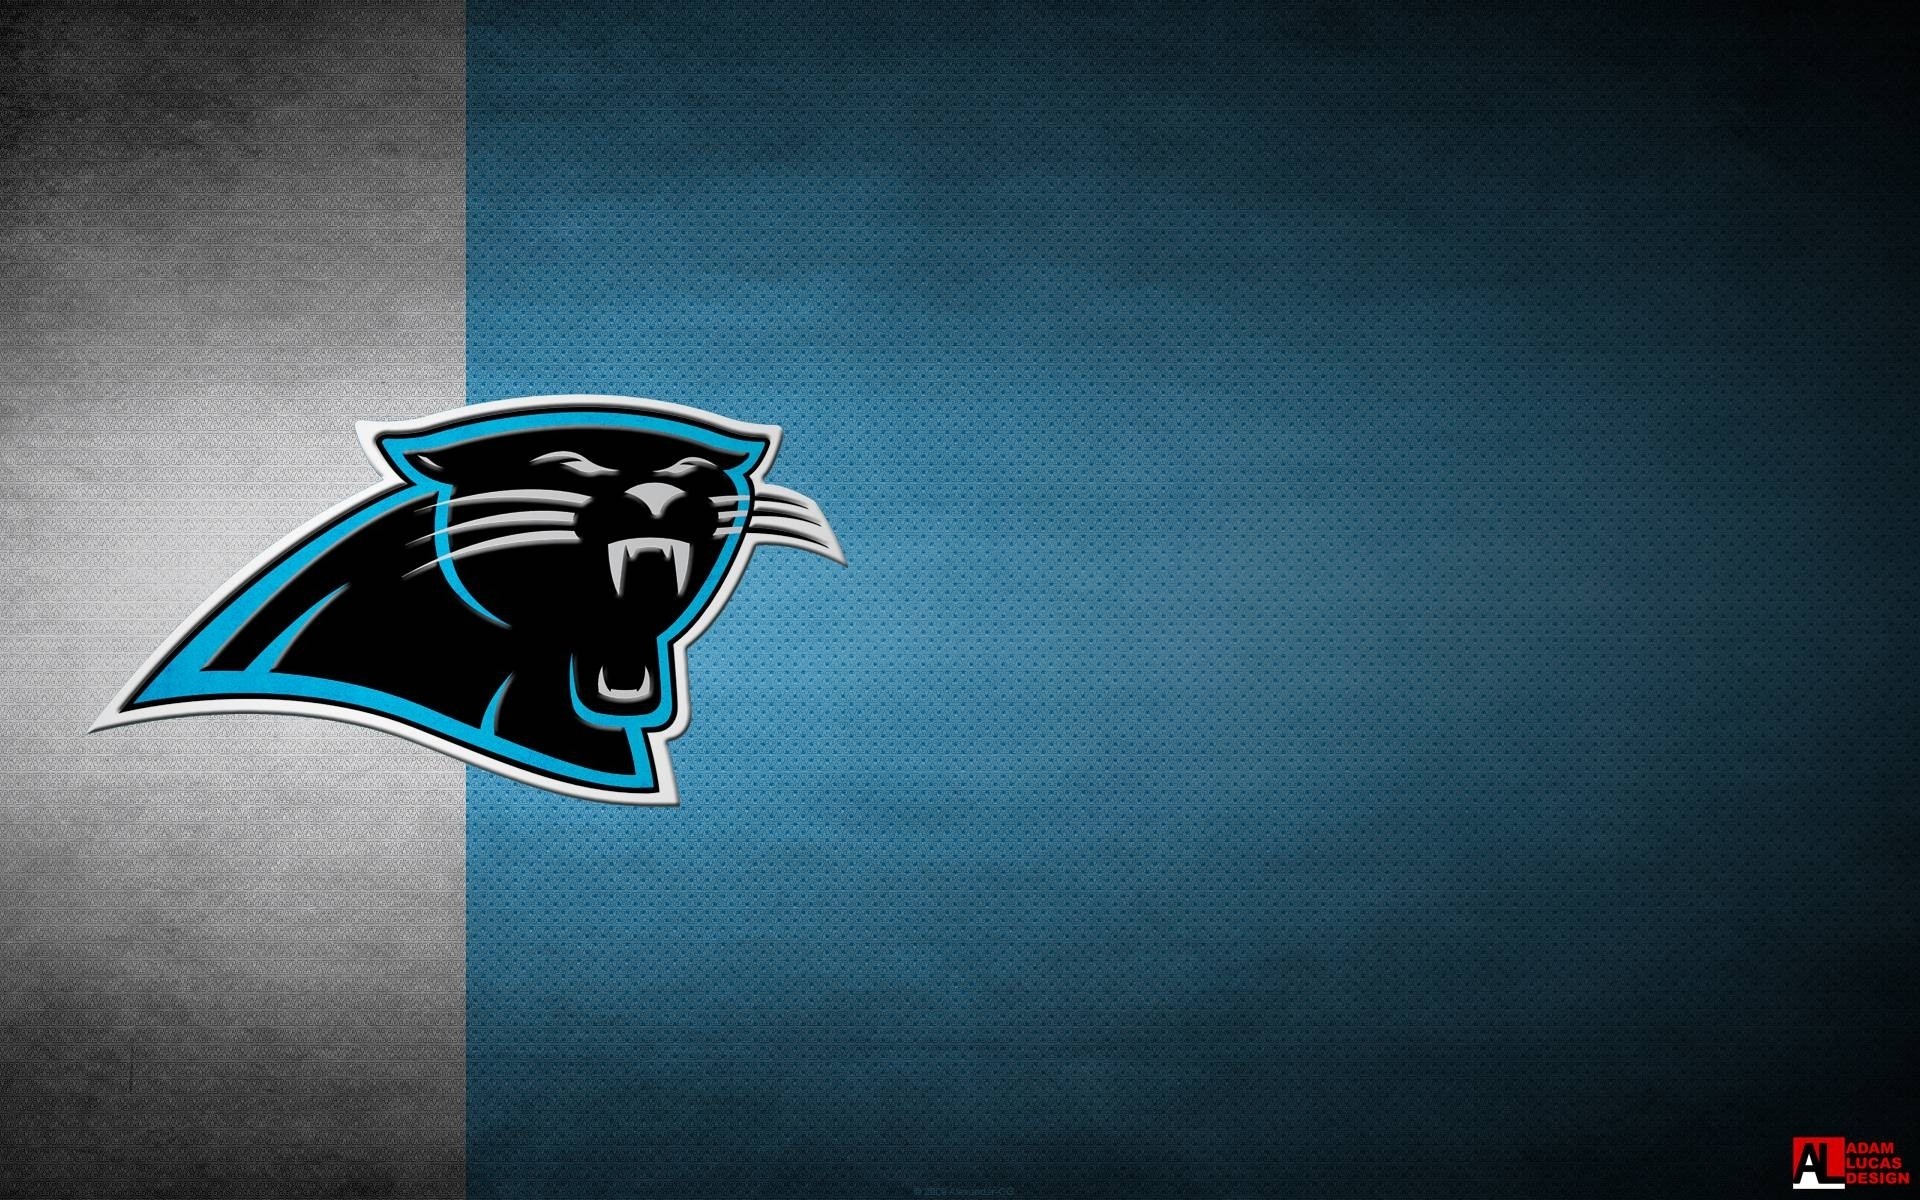 1920x1200 Carolina Panthers Wallpaper HD Wallpapers Backgrounds of Your Choice  2012Ã1339 Carolina Panthers Desktop Wallpapers (37 Wallpapers) | Adorable  Wal…